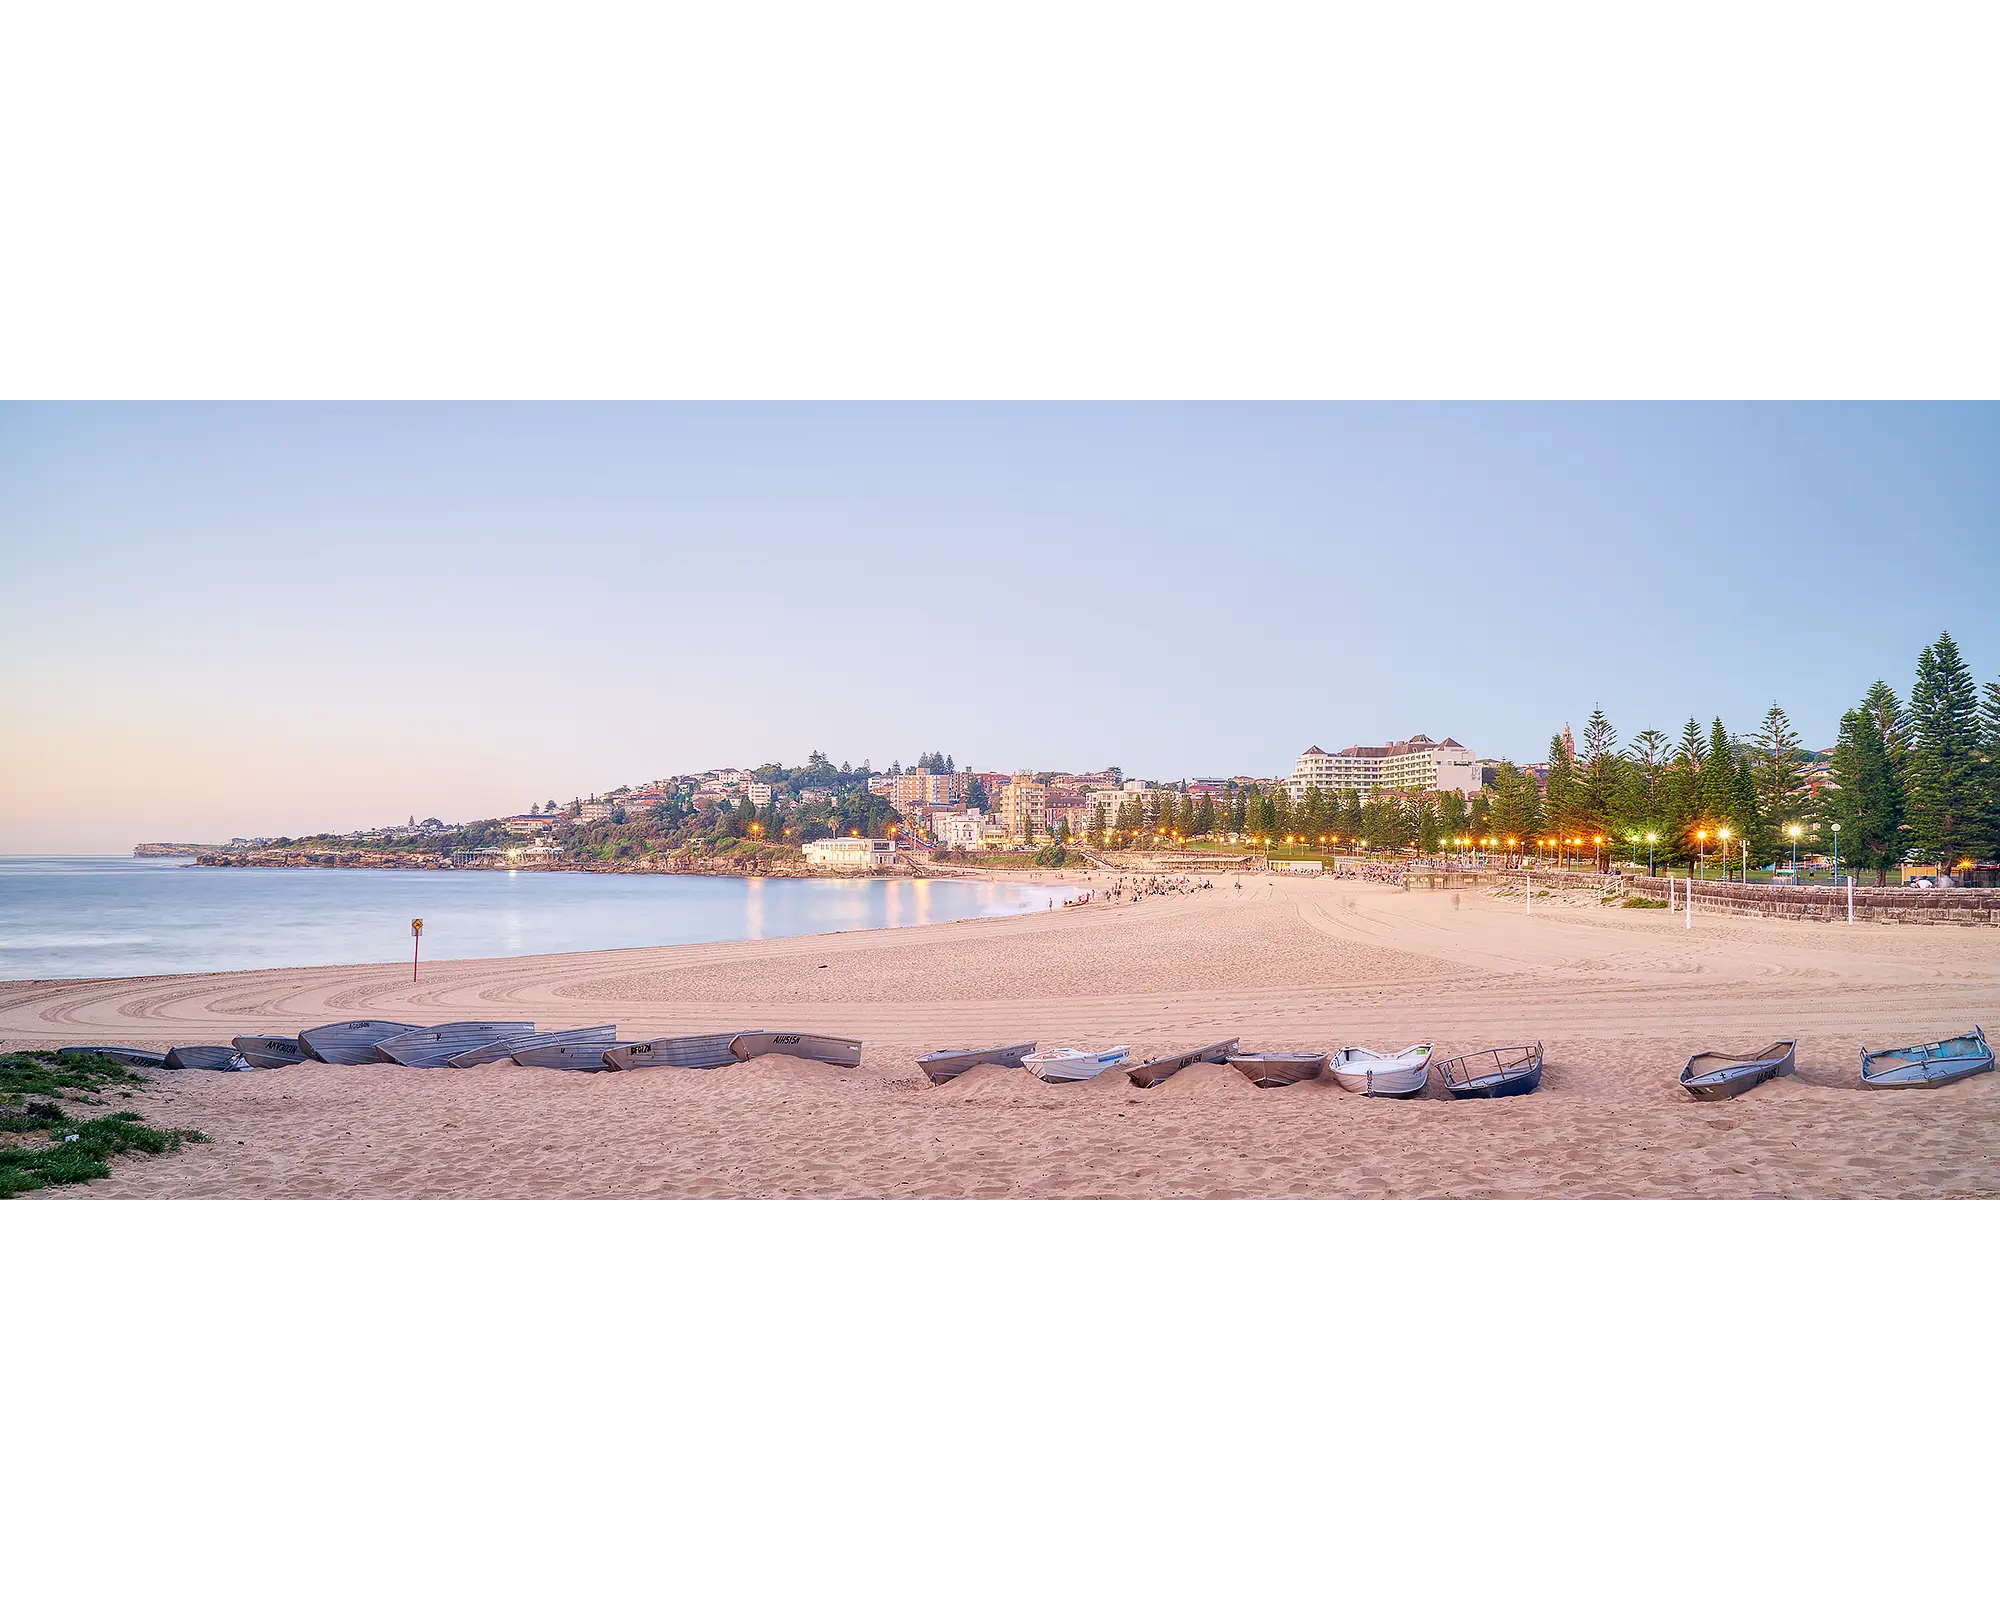 Coogee Sands - Sunrise at Coogee Beach, Sydney.